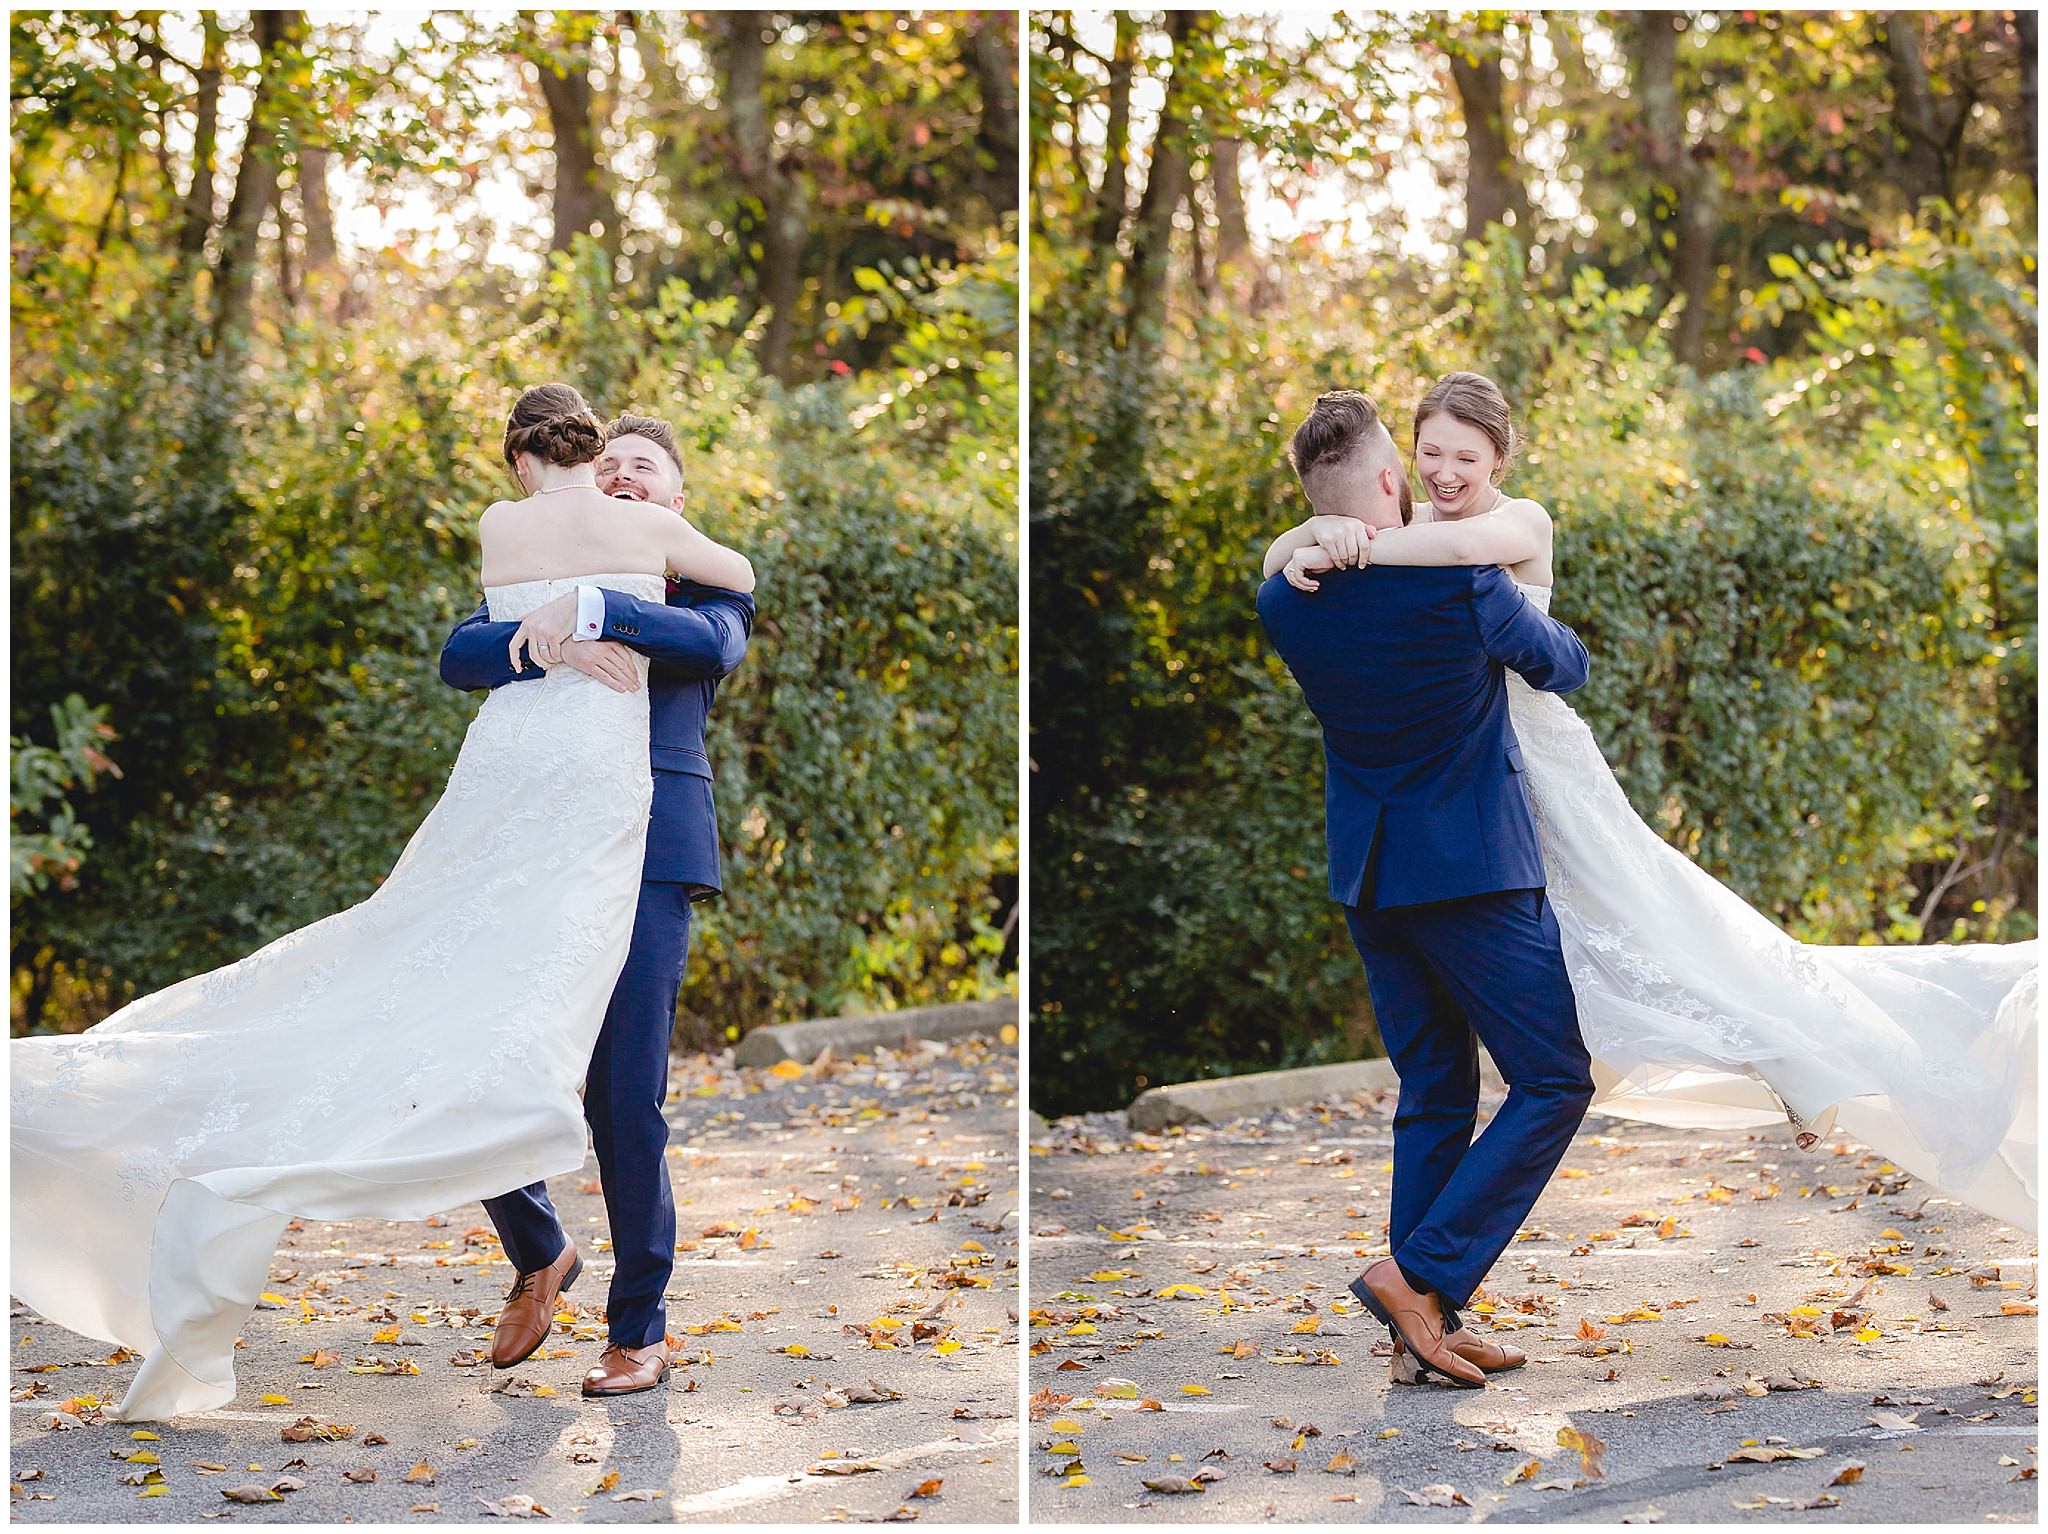 Groom swings his bride around playfully during portraits at the Chadwick